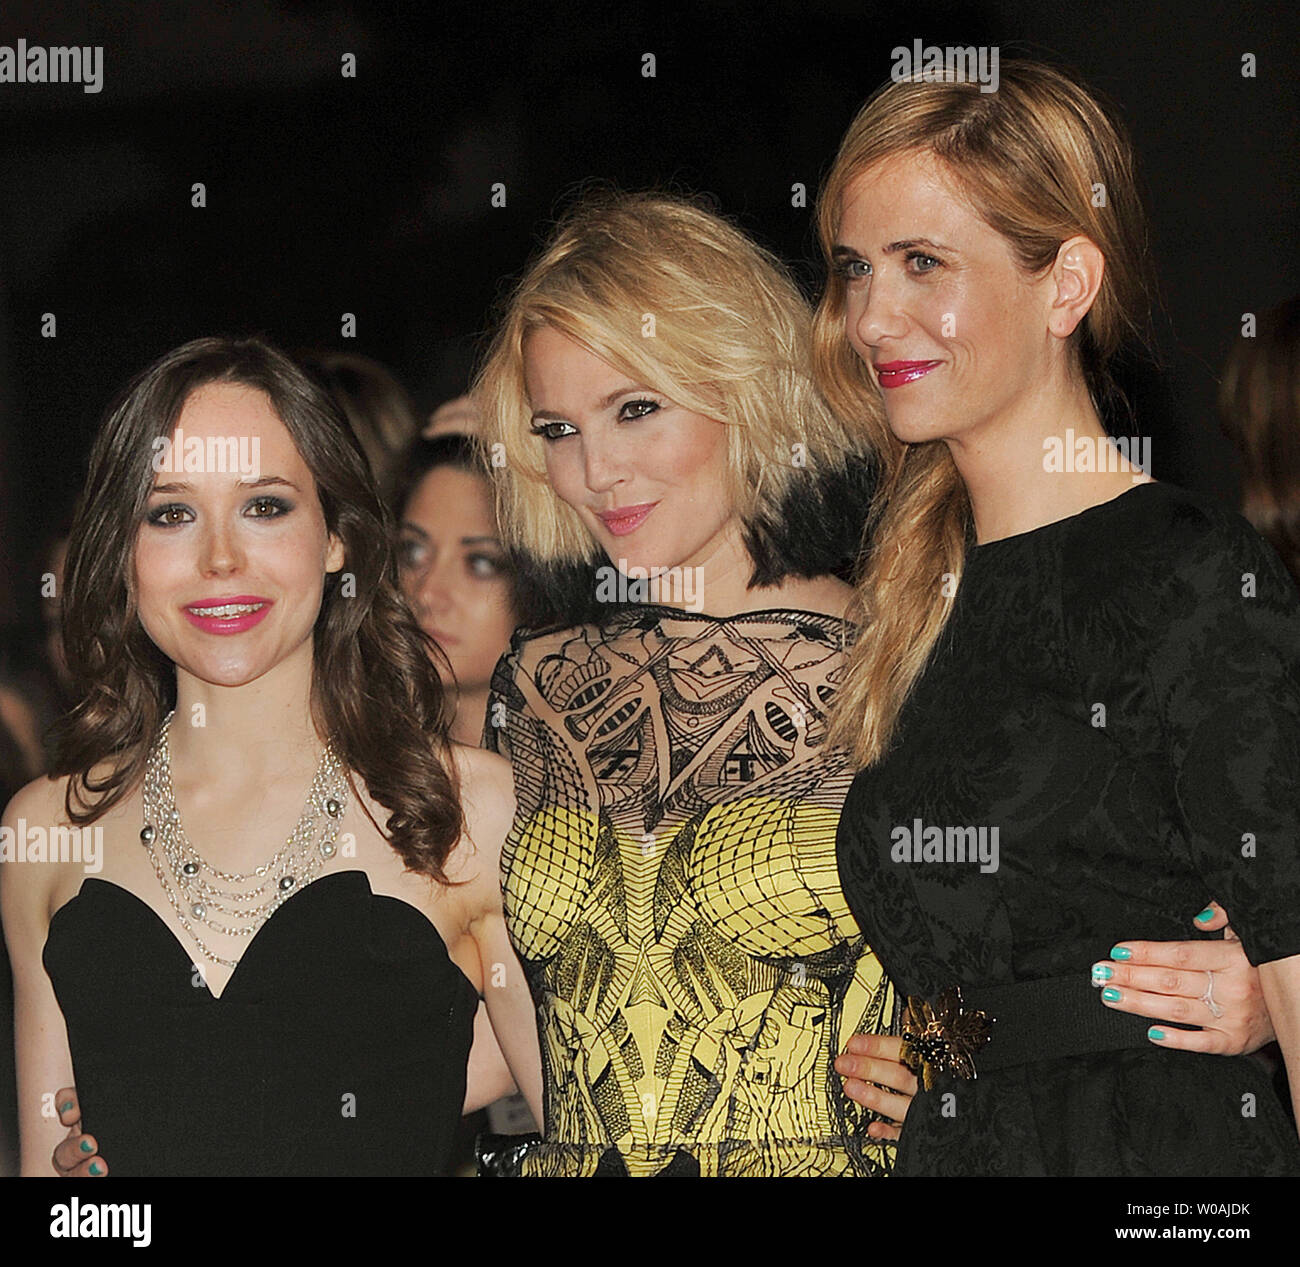 (L-R) Ellen Page, Drew Barrymore and Kristen Wiig arrive for the world premiere of Barrymore's directorial debut 'Whip It' at the Ryerson Theater during the Toronto International Film Festival in Toronto, Canada on September 13, 2009.  UPI /Christine Chew Stock Photo